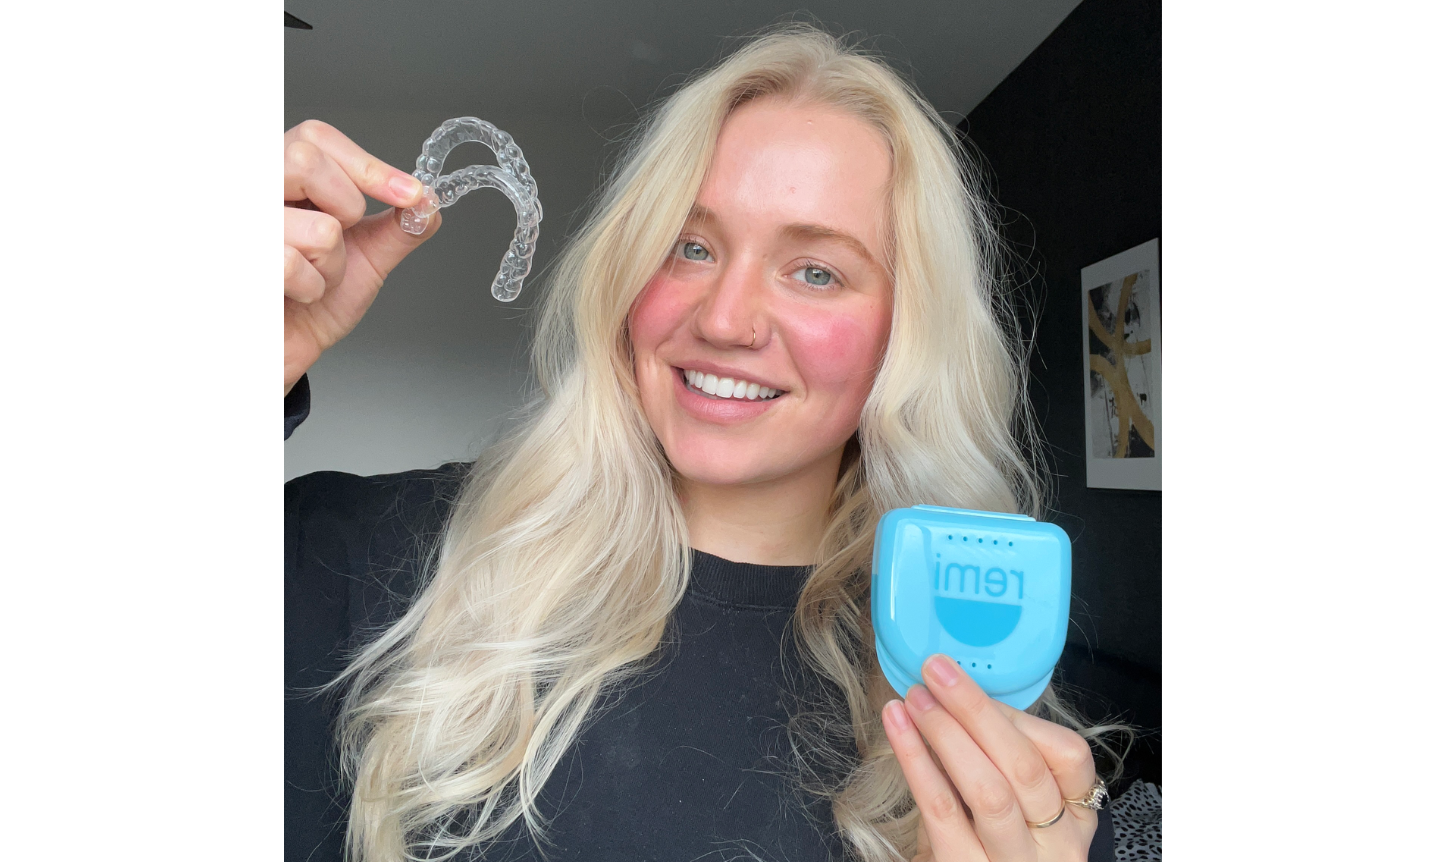 Woman holding an invisalign aligner and its case, smiling at the camera.